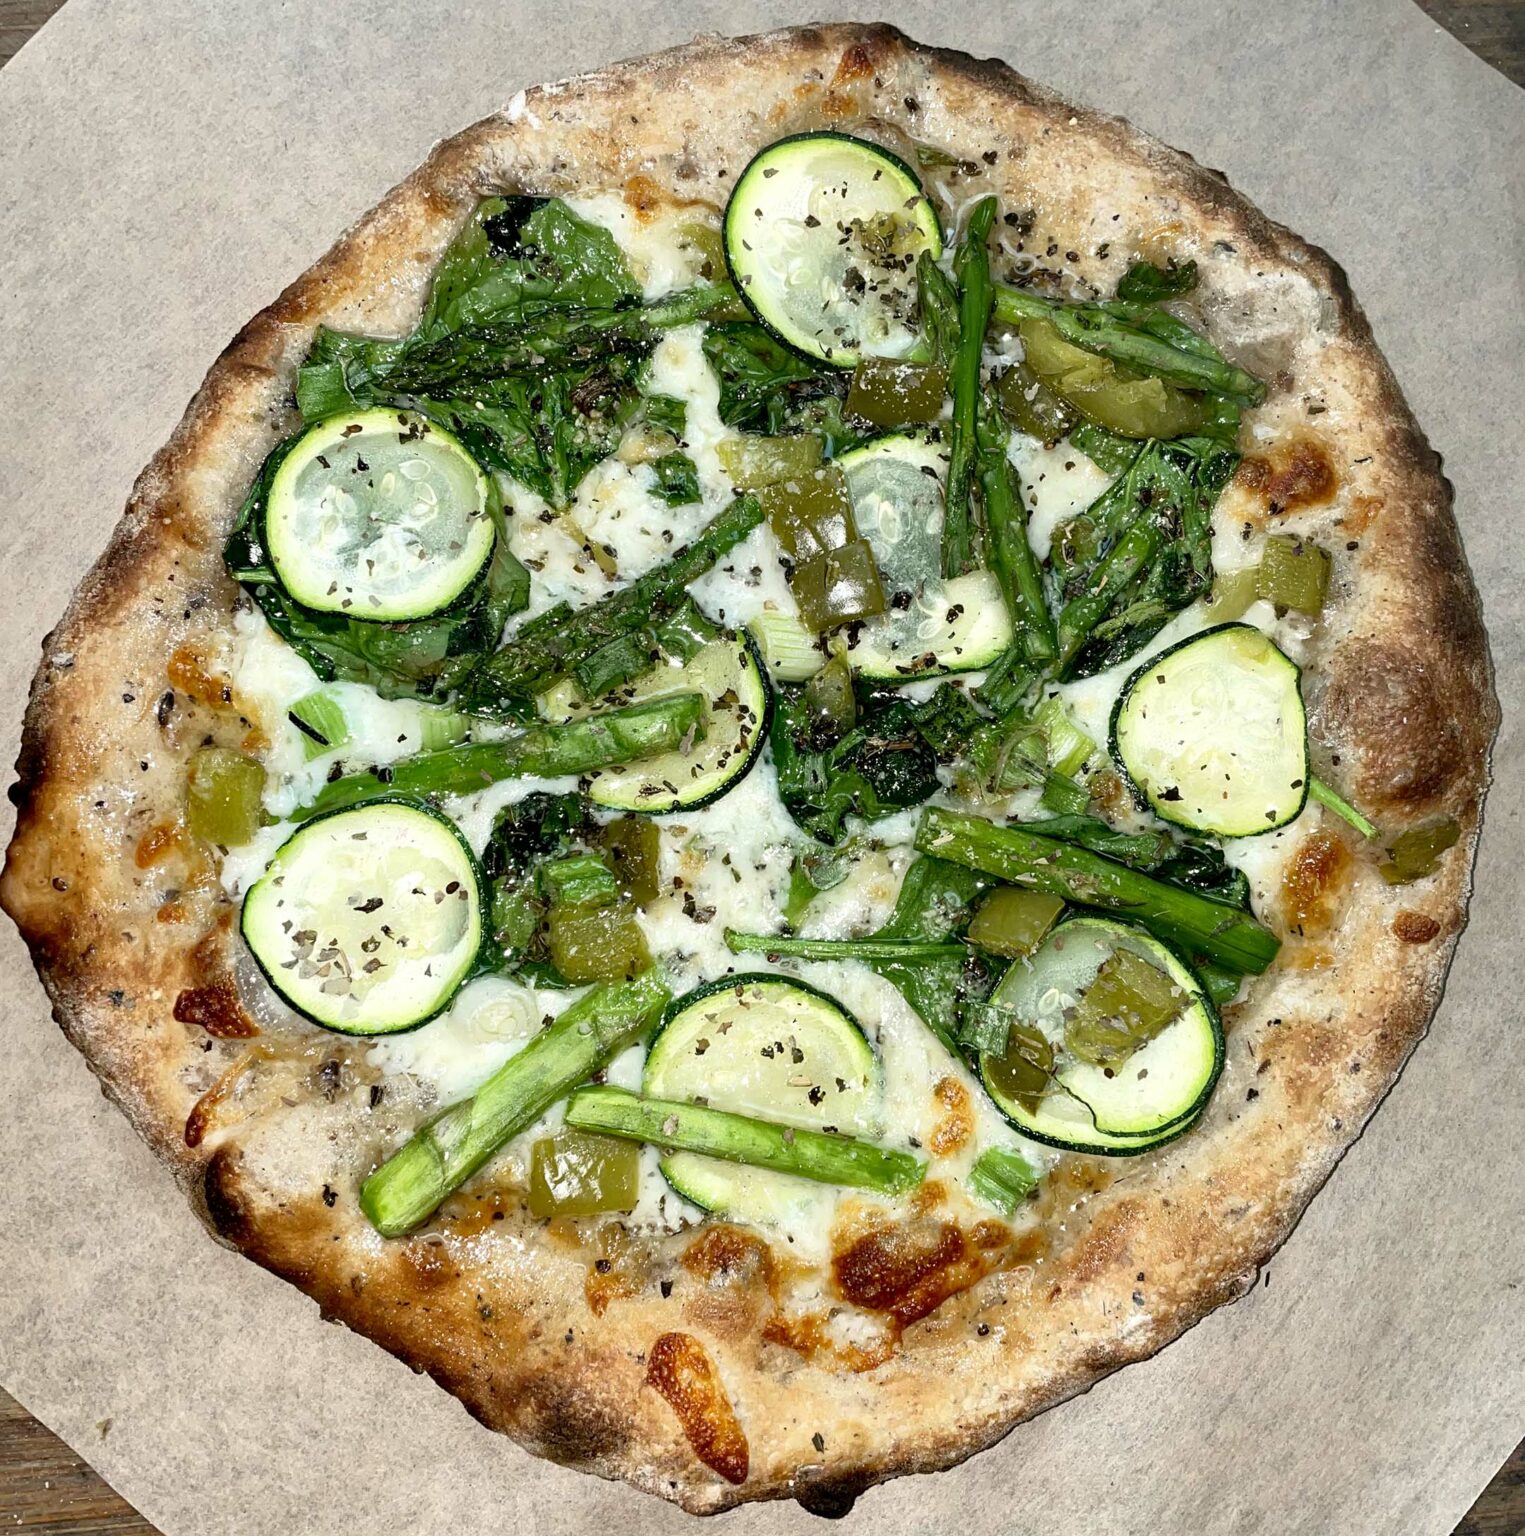 Evergreen Artisan Pizza at Log Home Wood Fired Pizza, McGregor, MN, Food Truck, Catering